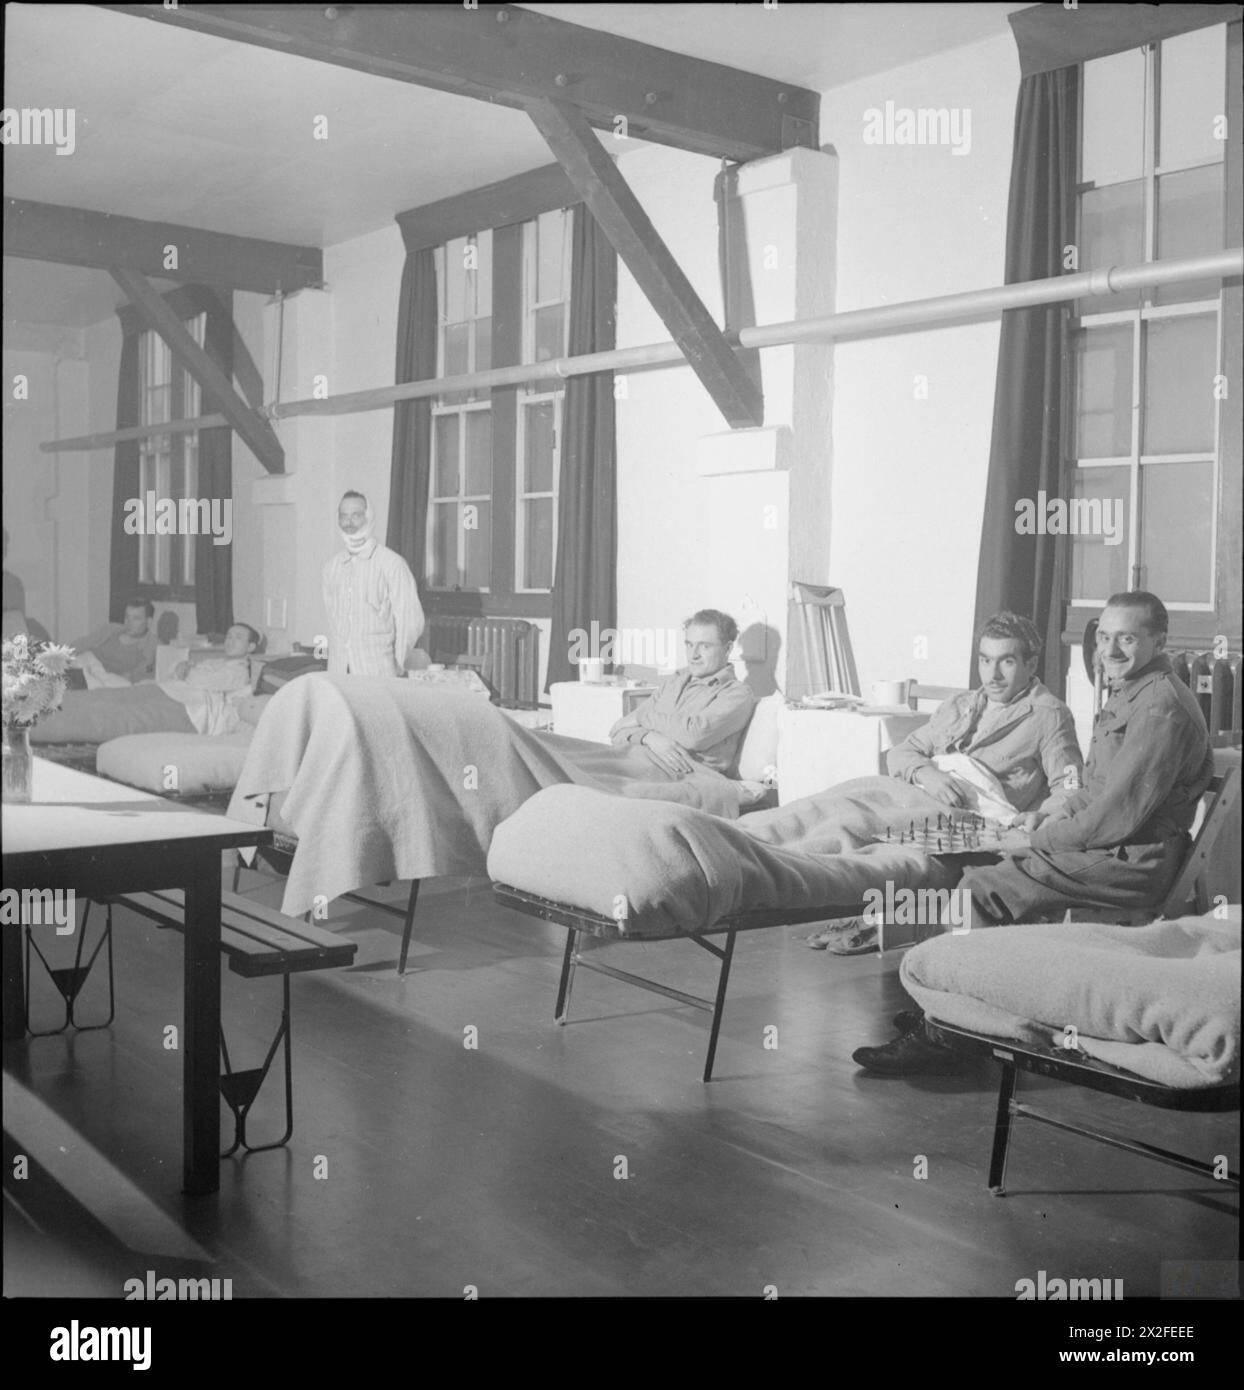 ITALIAN PRISONERS OF WAR IN BRITAIN: EVERYDAY LIFE AT AN ITALIAN POW CAMP, ENGLAND, UK, 1945 - A general view of the infirmary at the N.144 workers camp near London, showing Italian PoWs in their hospital beds Stock Photo